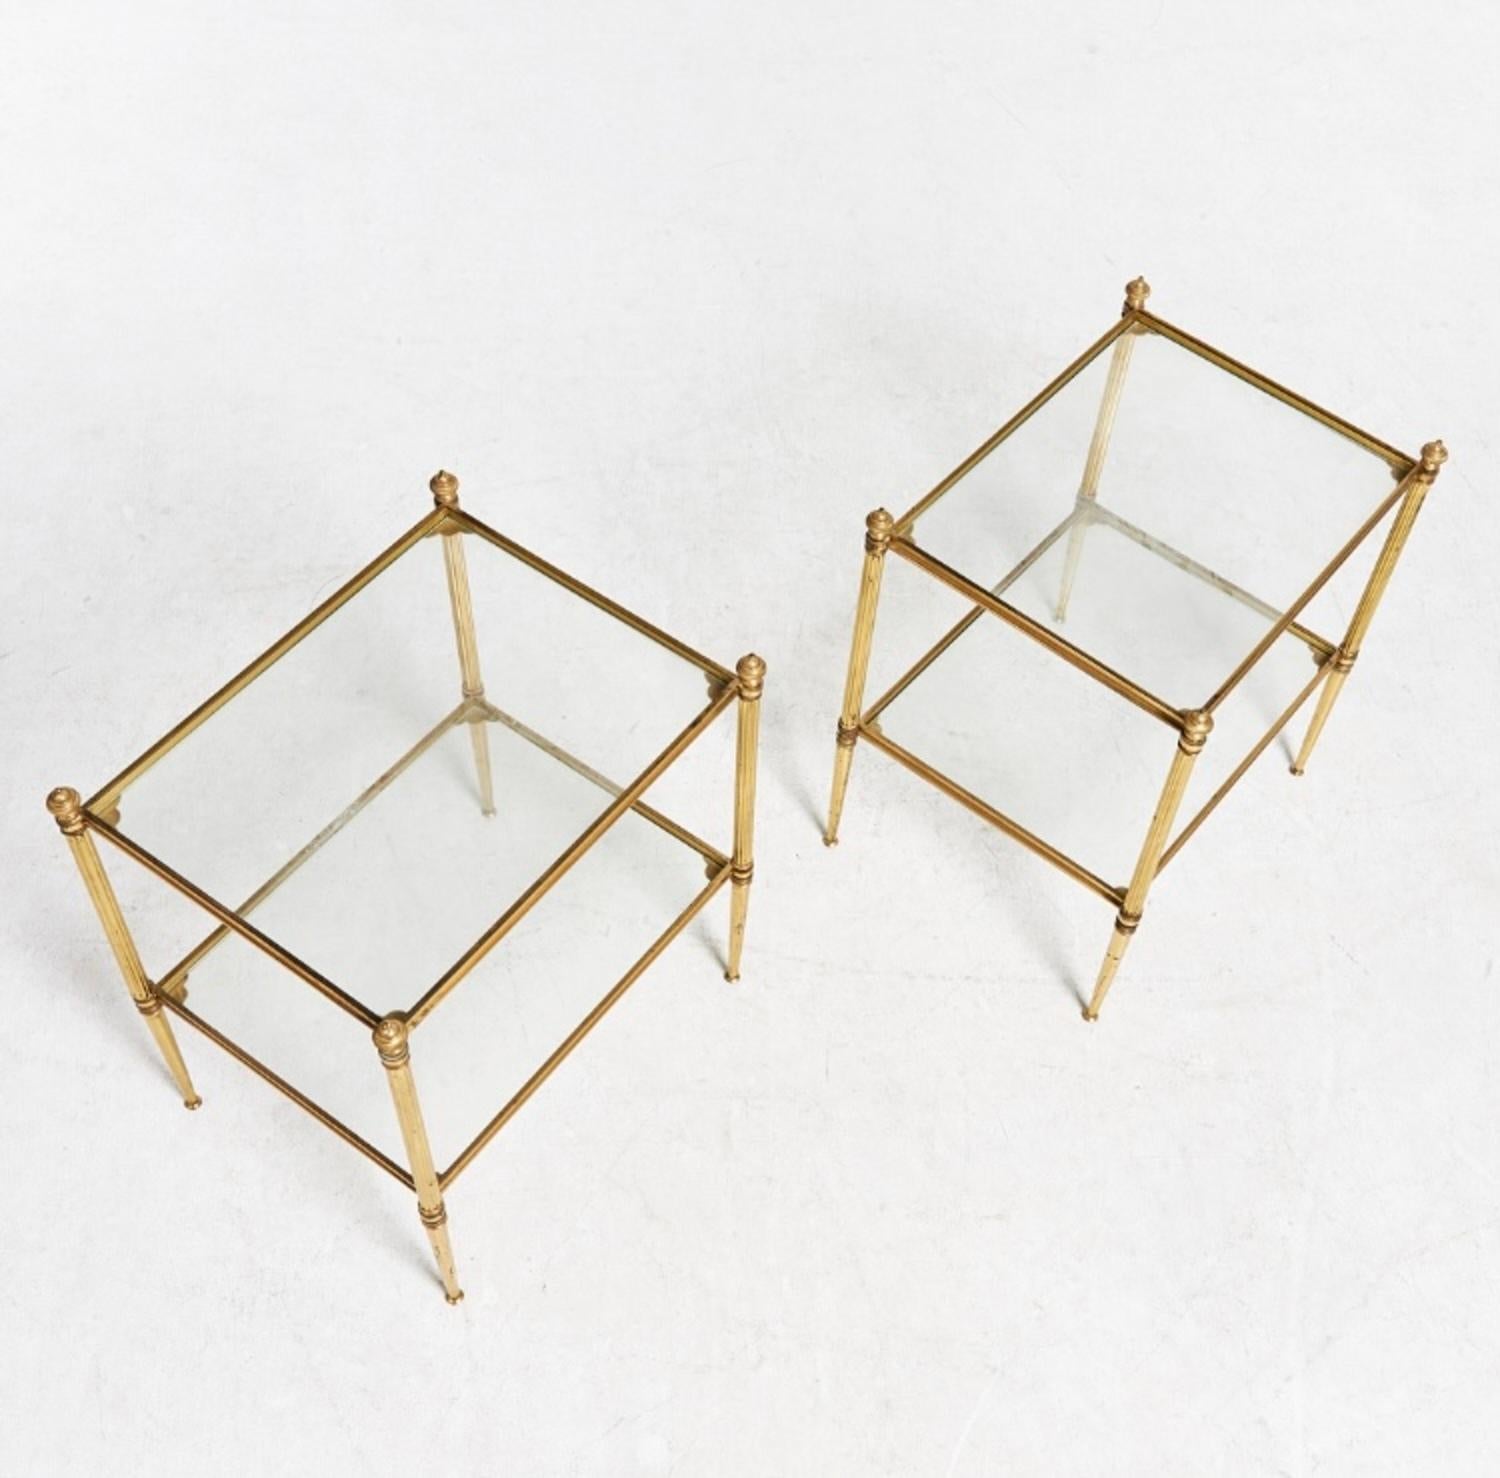 Neoclassical Revival Pair of French Mid-Century Modern Brass and Glass Jansen Style Side Tables